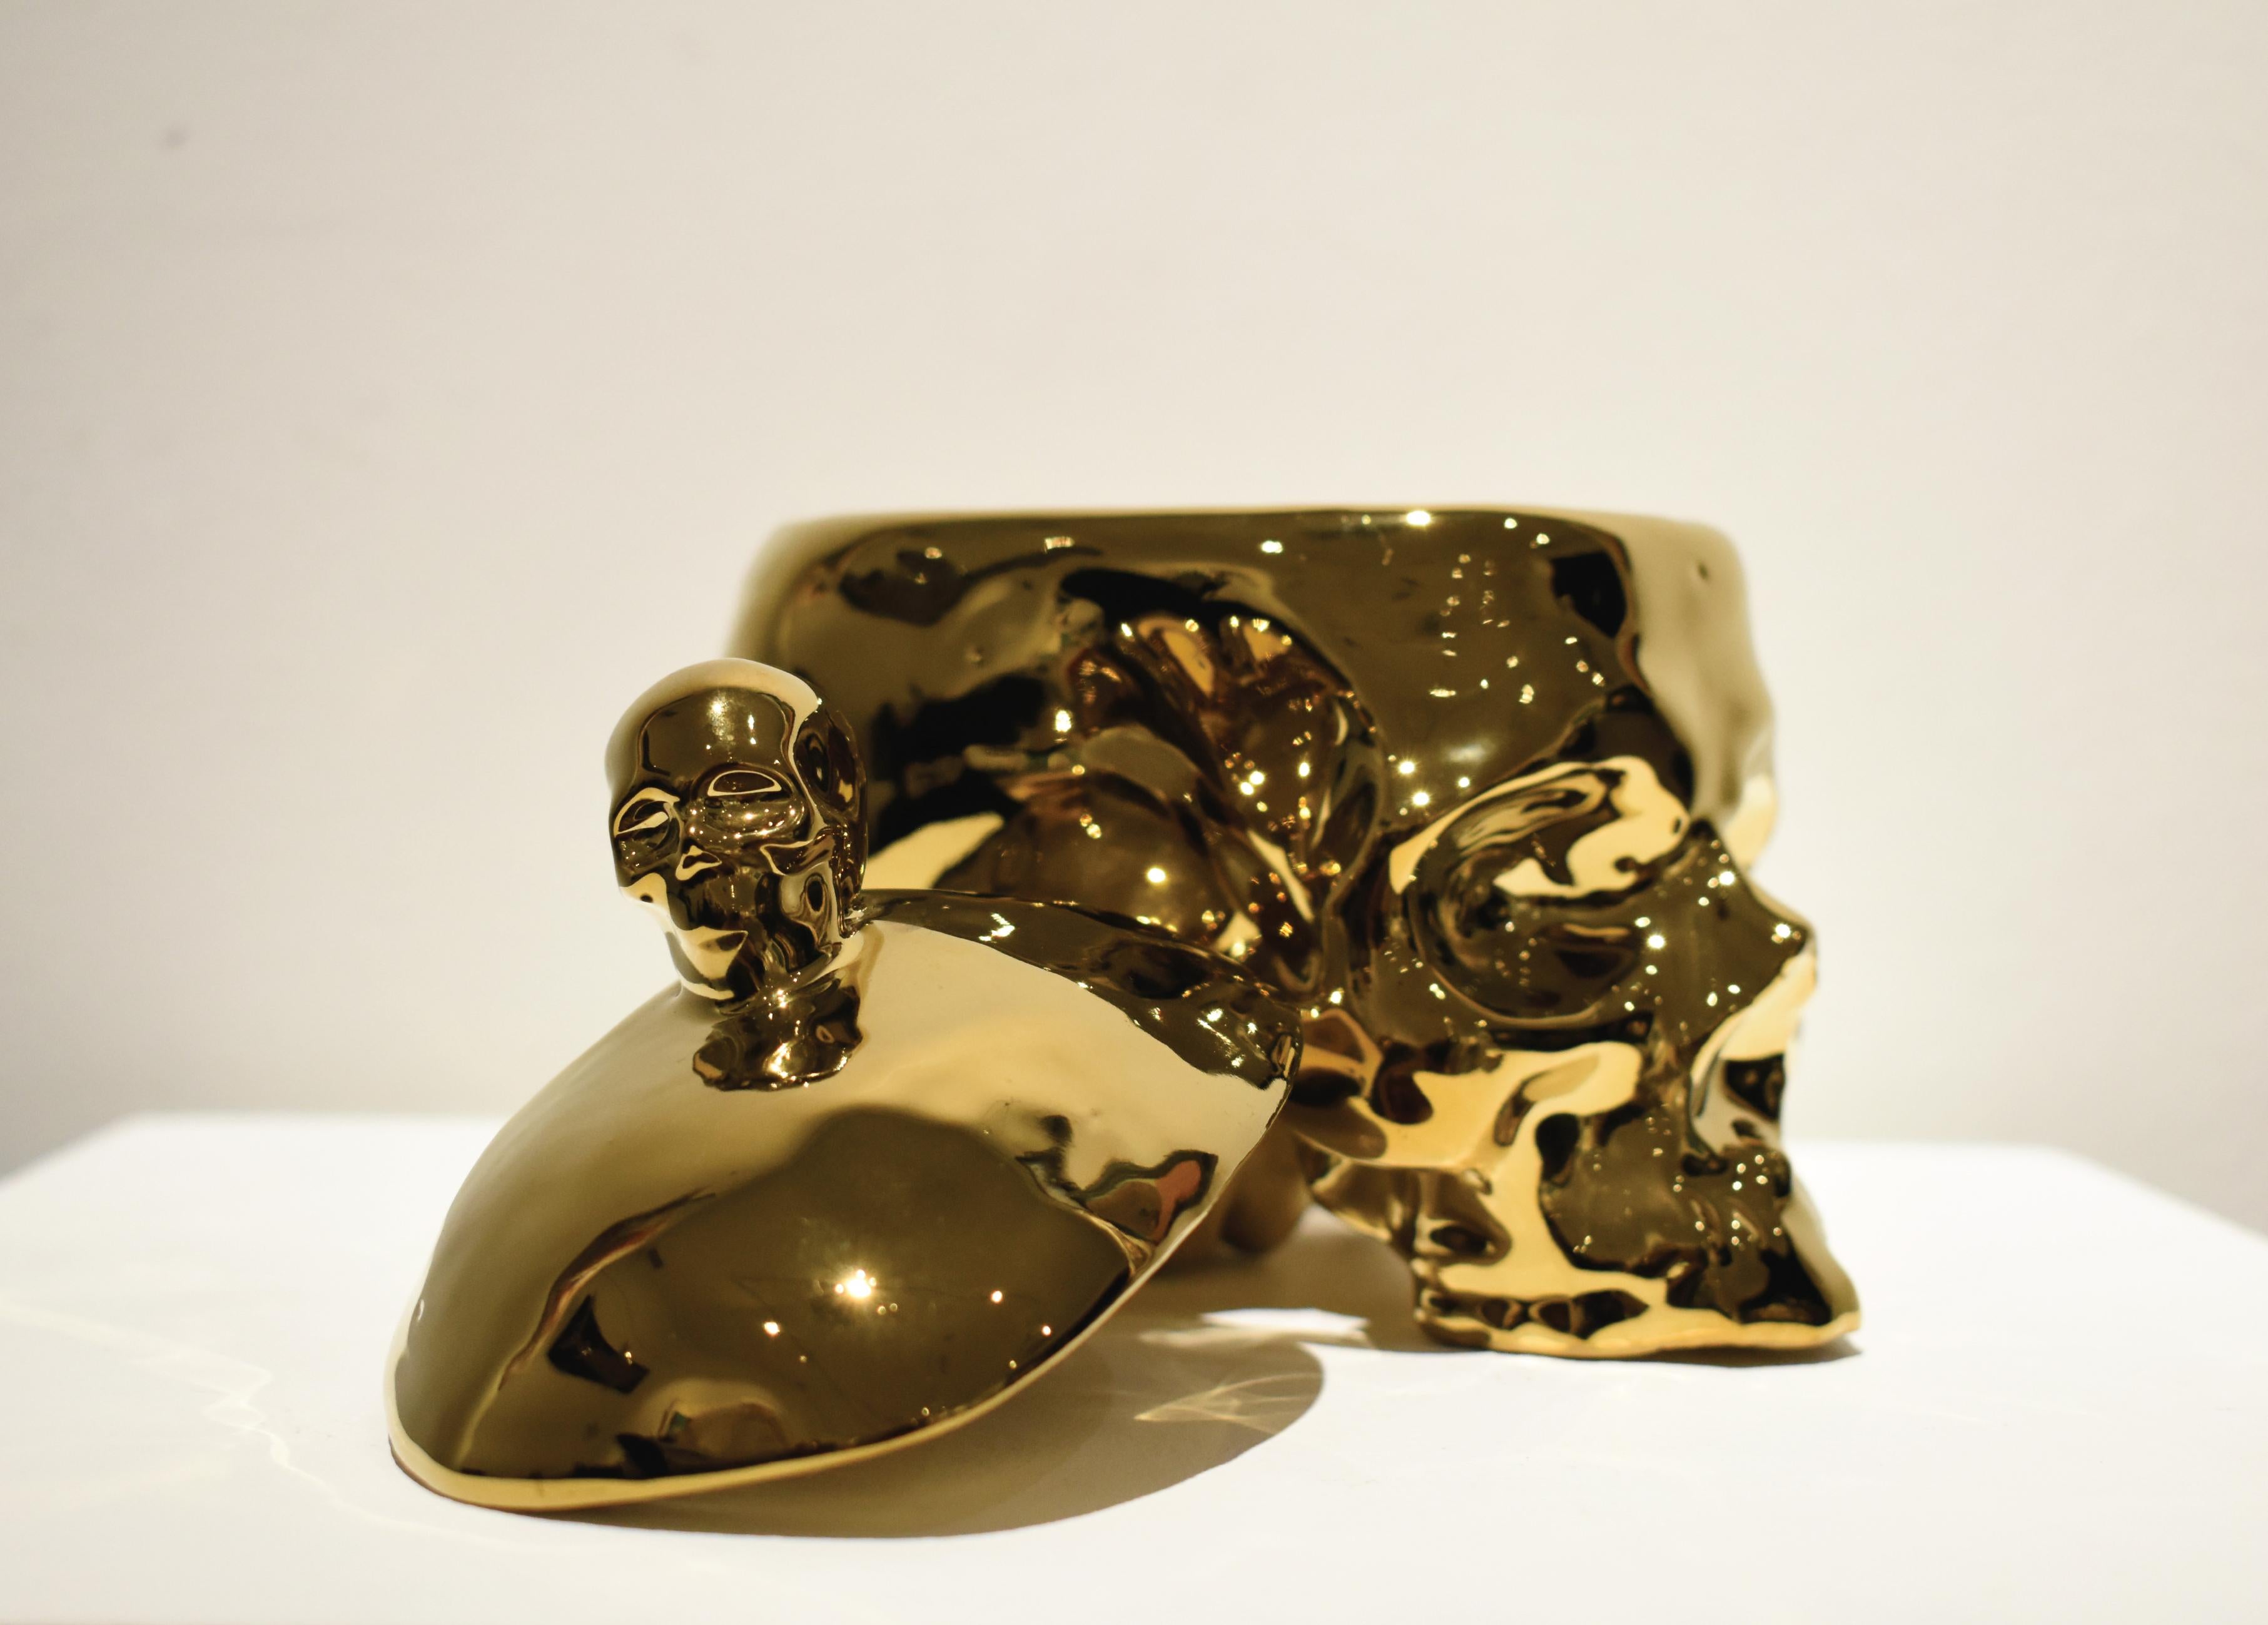 Porcelain Sculpture With Skull Shape In Gold Color, Removable Cover - Brown Figurative Sculpture by Huang Yulong